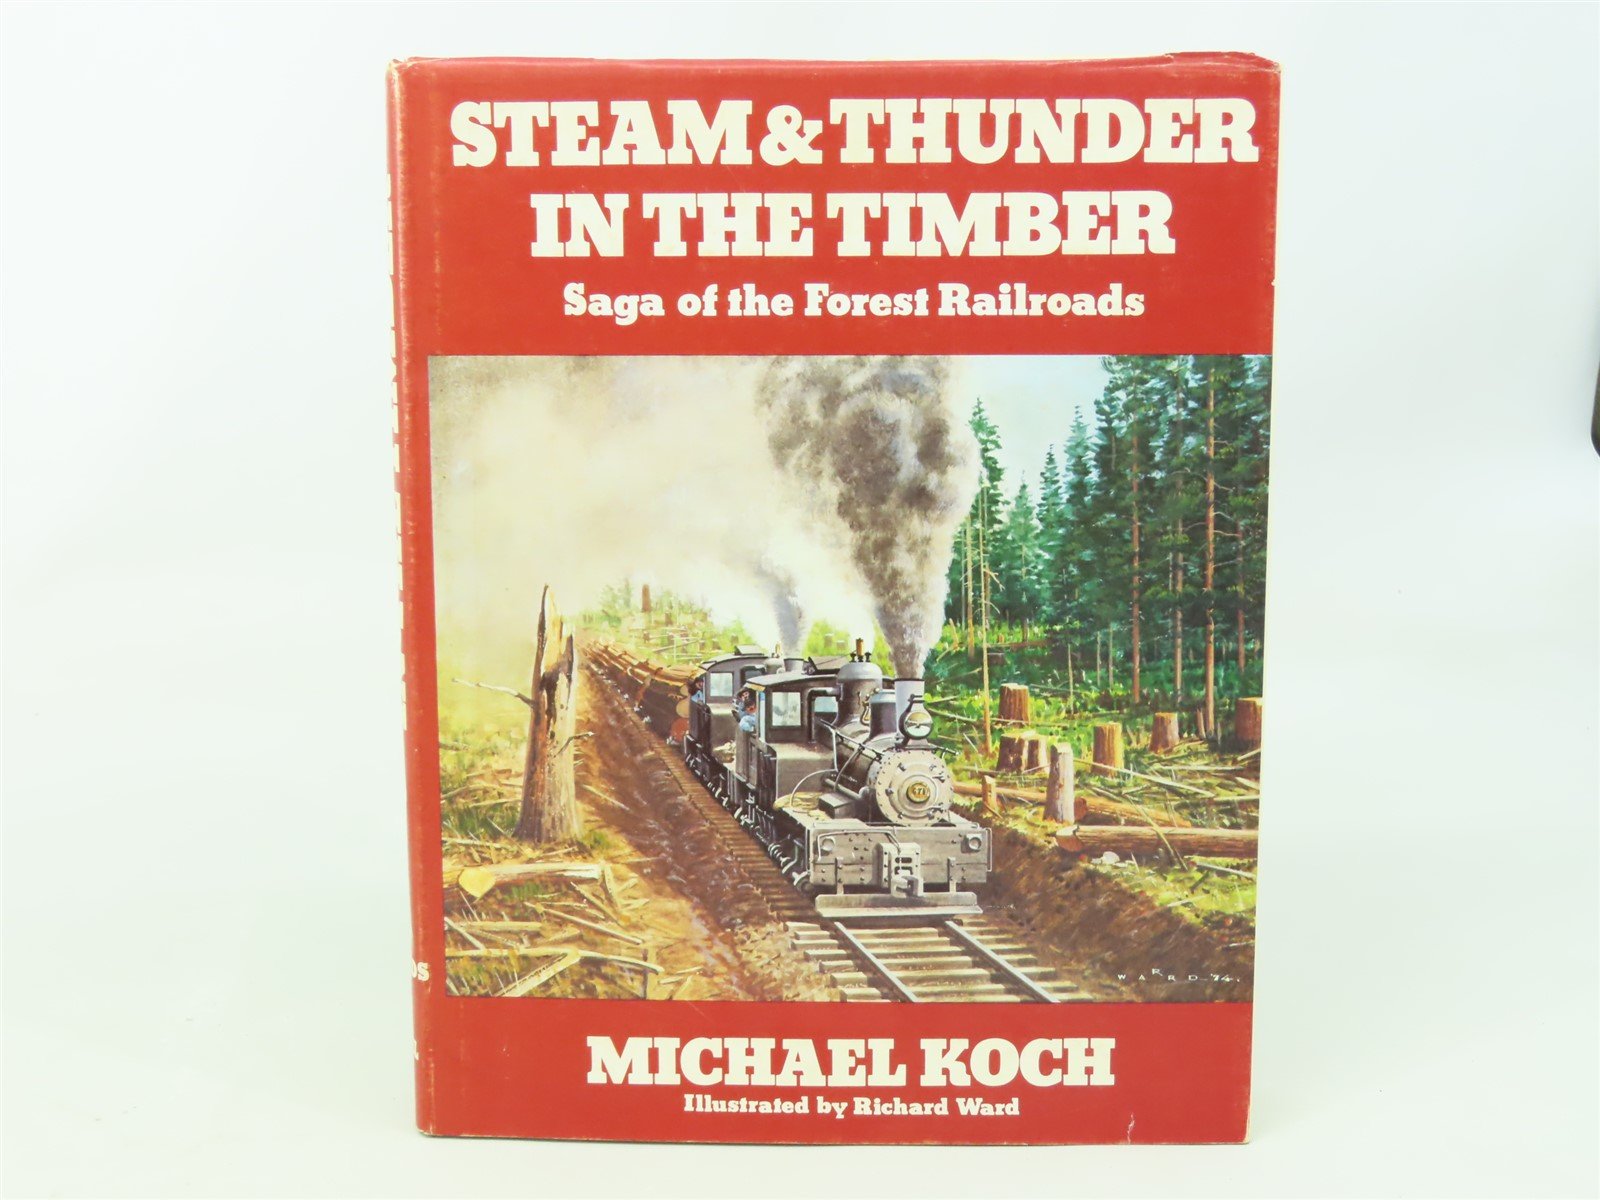 Steam & Thunder In The Timber by Michael Koch ©1979 HC Book - Signed by Author